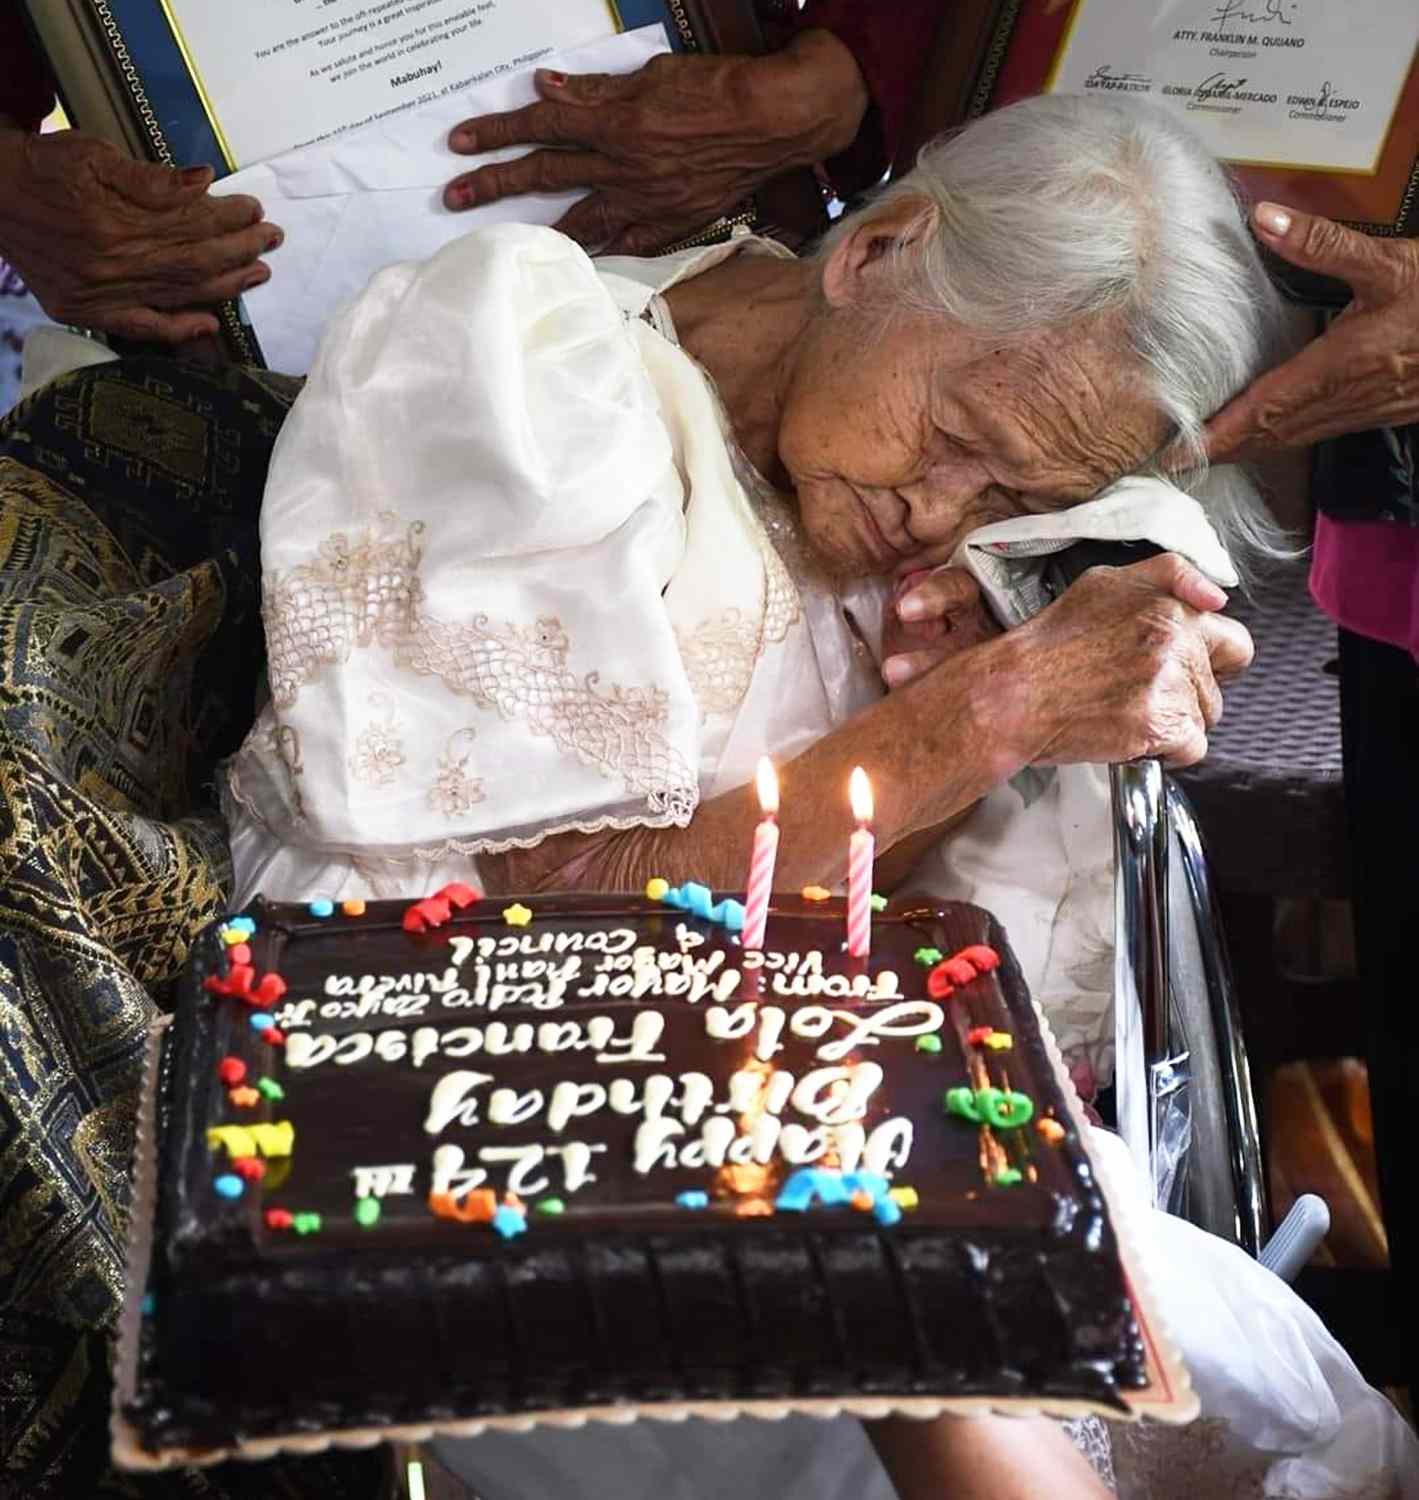 Oldest person in the world